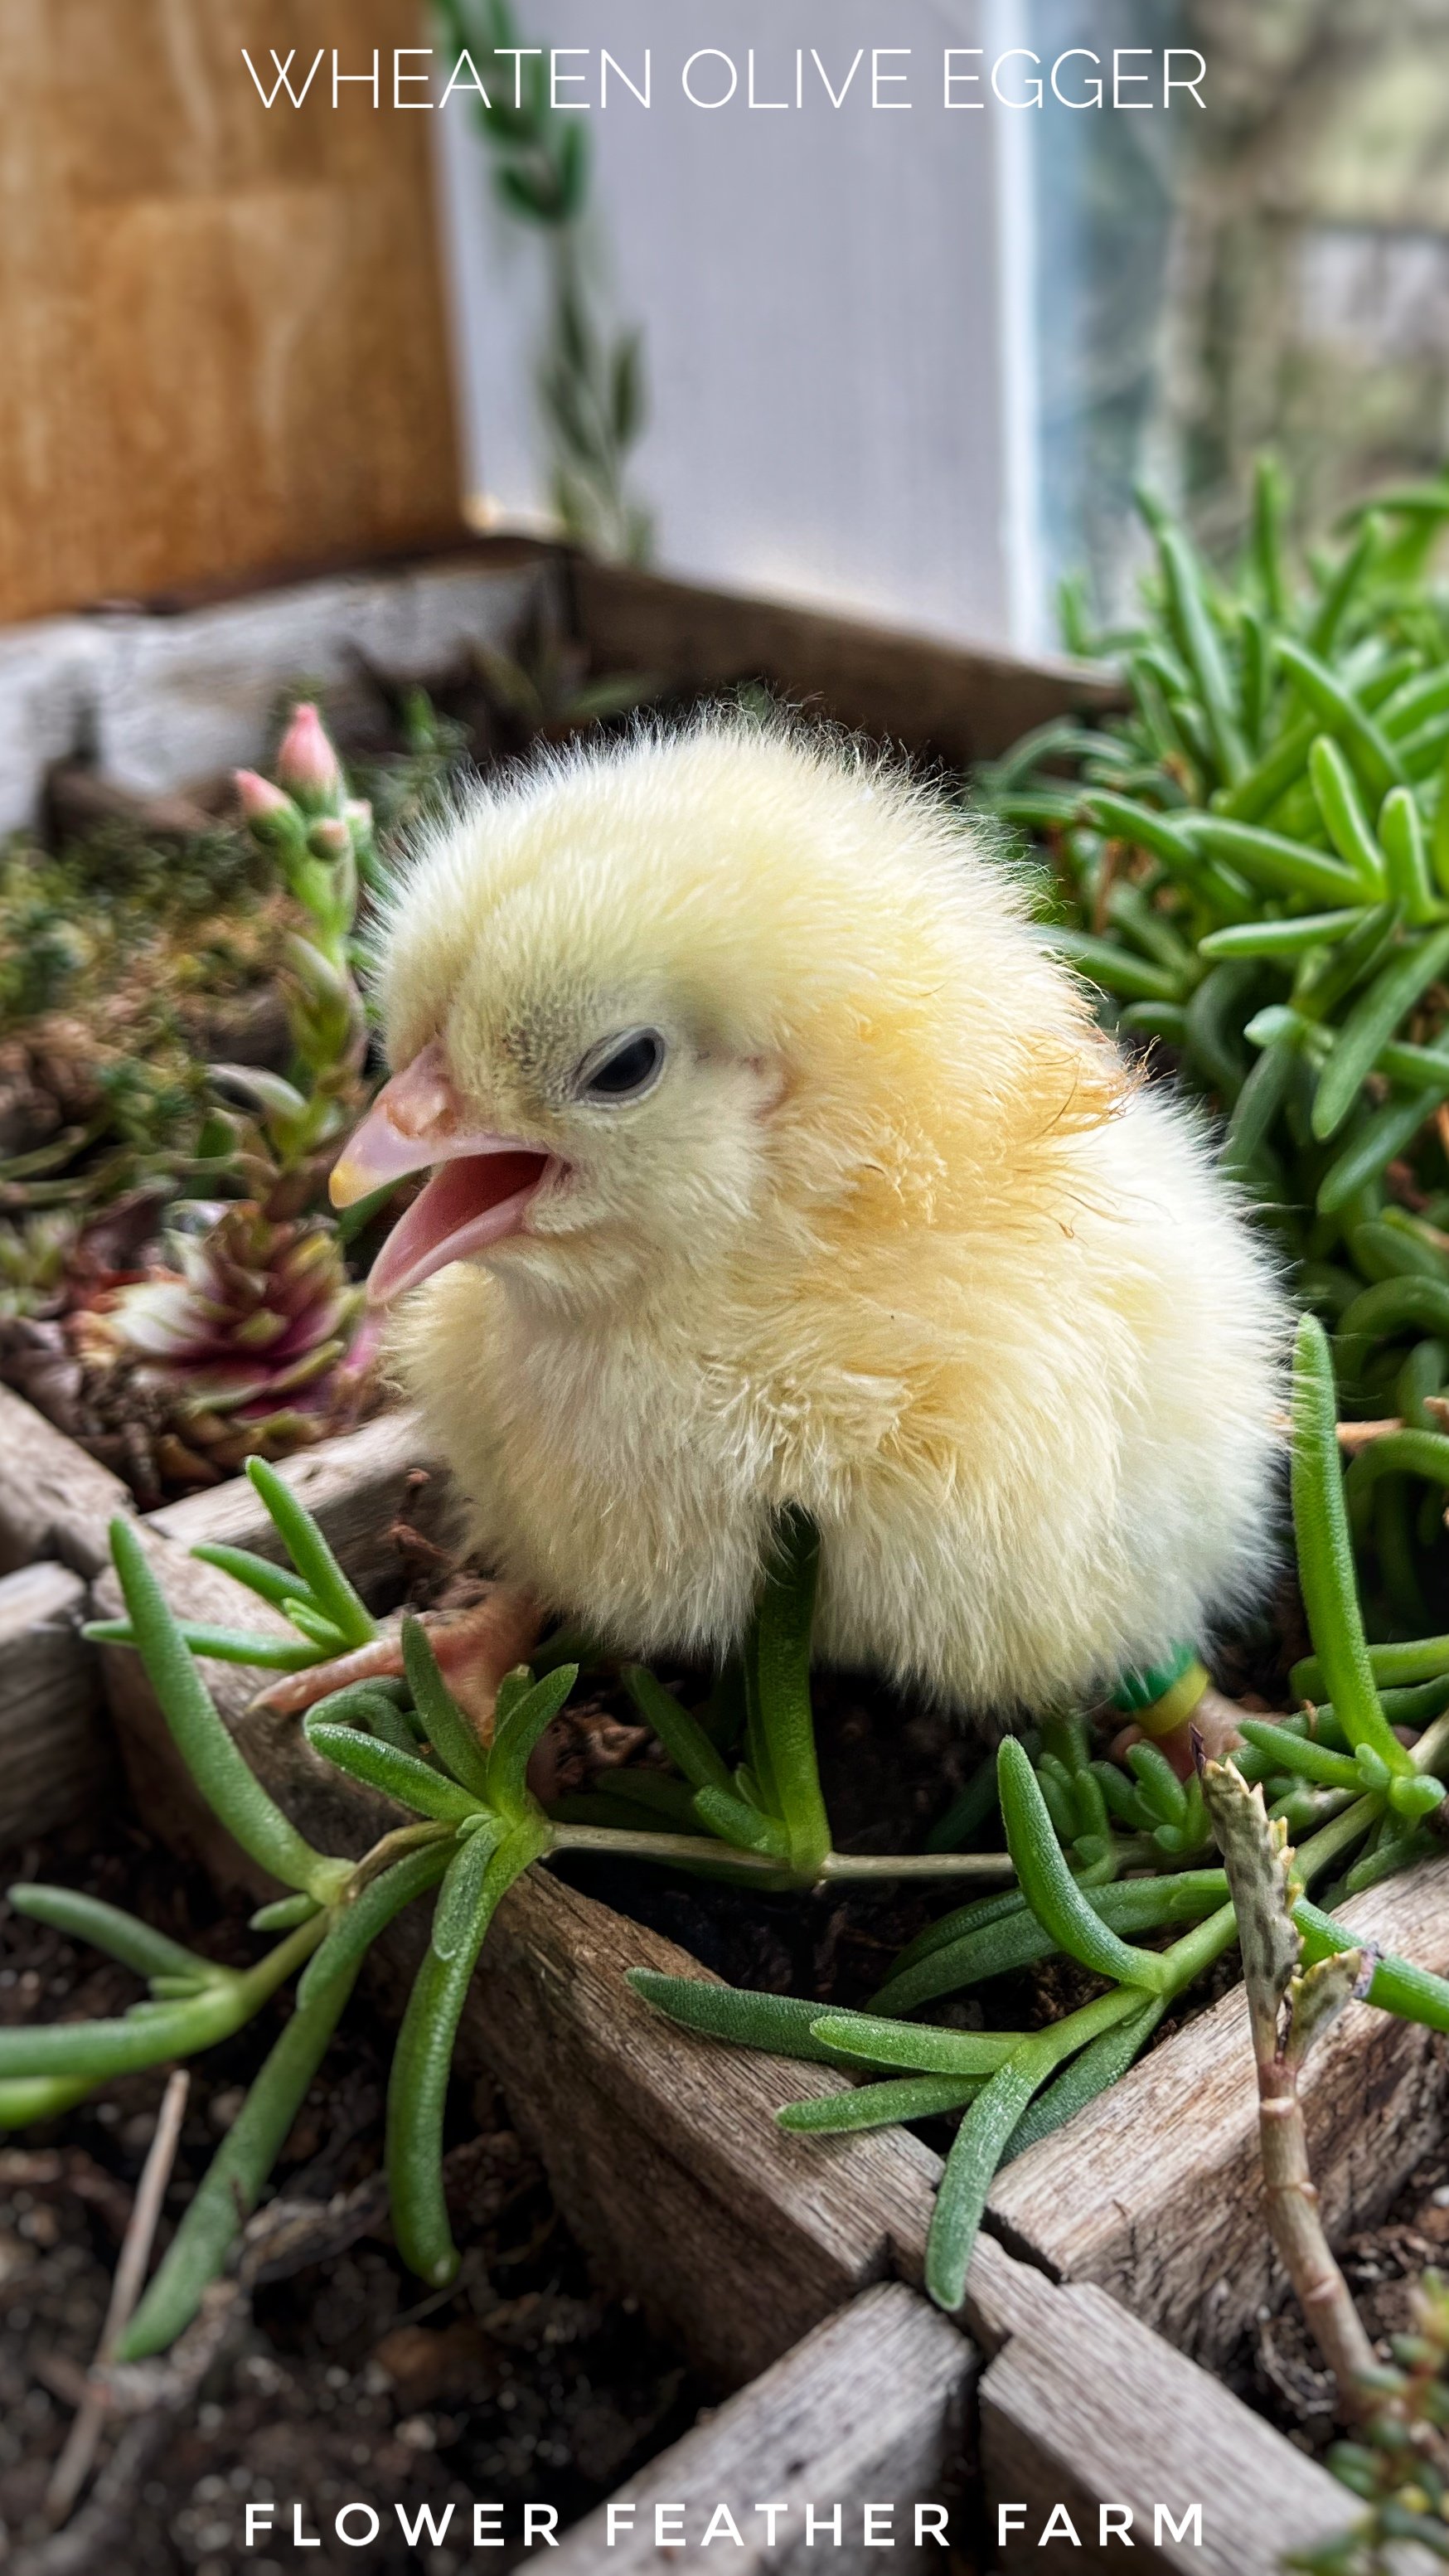 Wheaten Olive Egger Chick at Flower Feather Farm, chicks &amp; dahlias